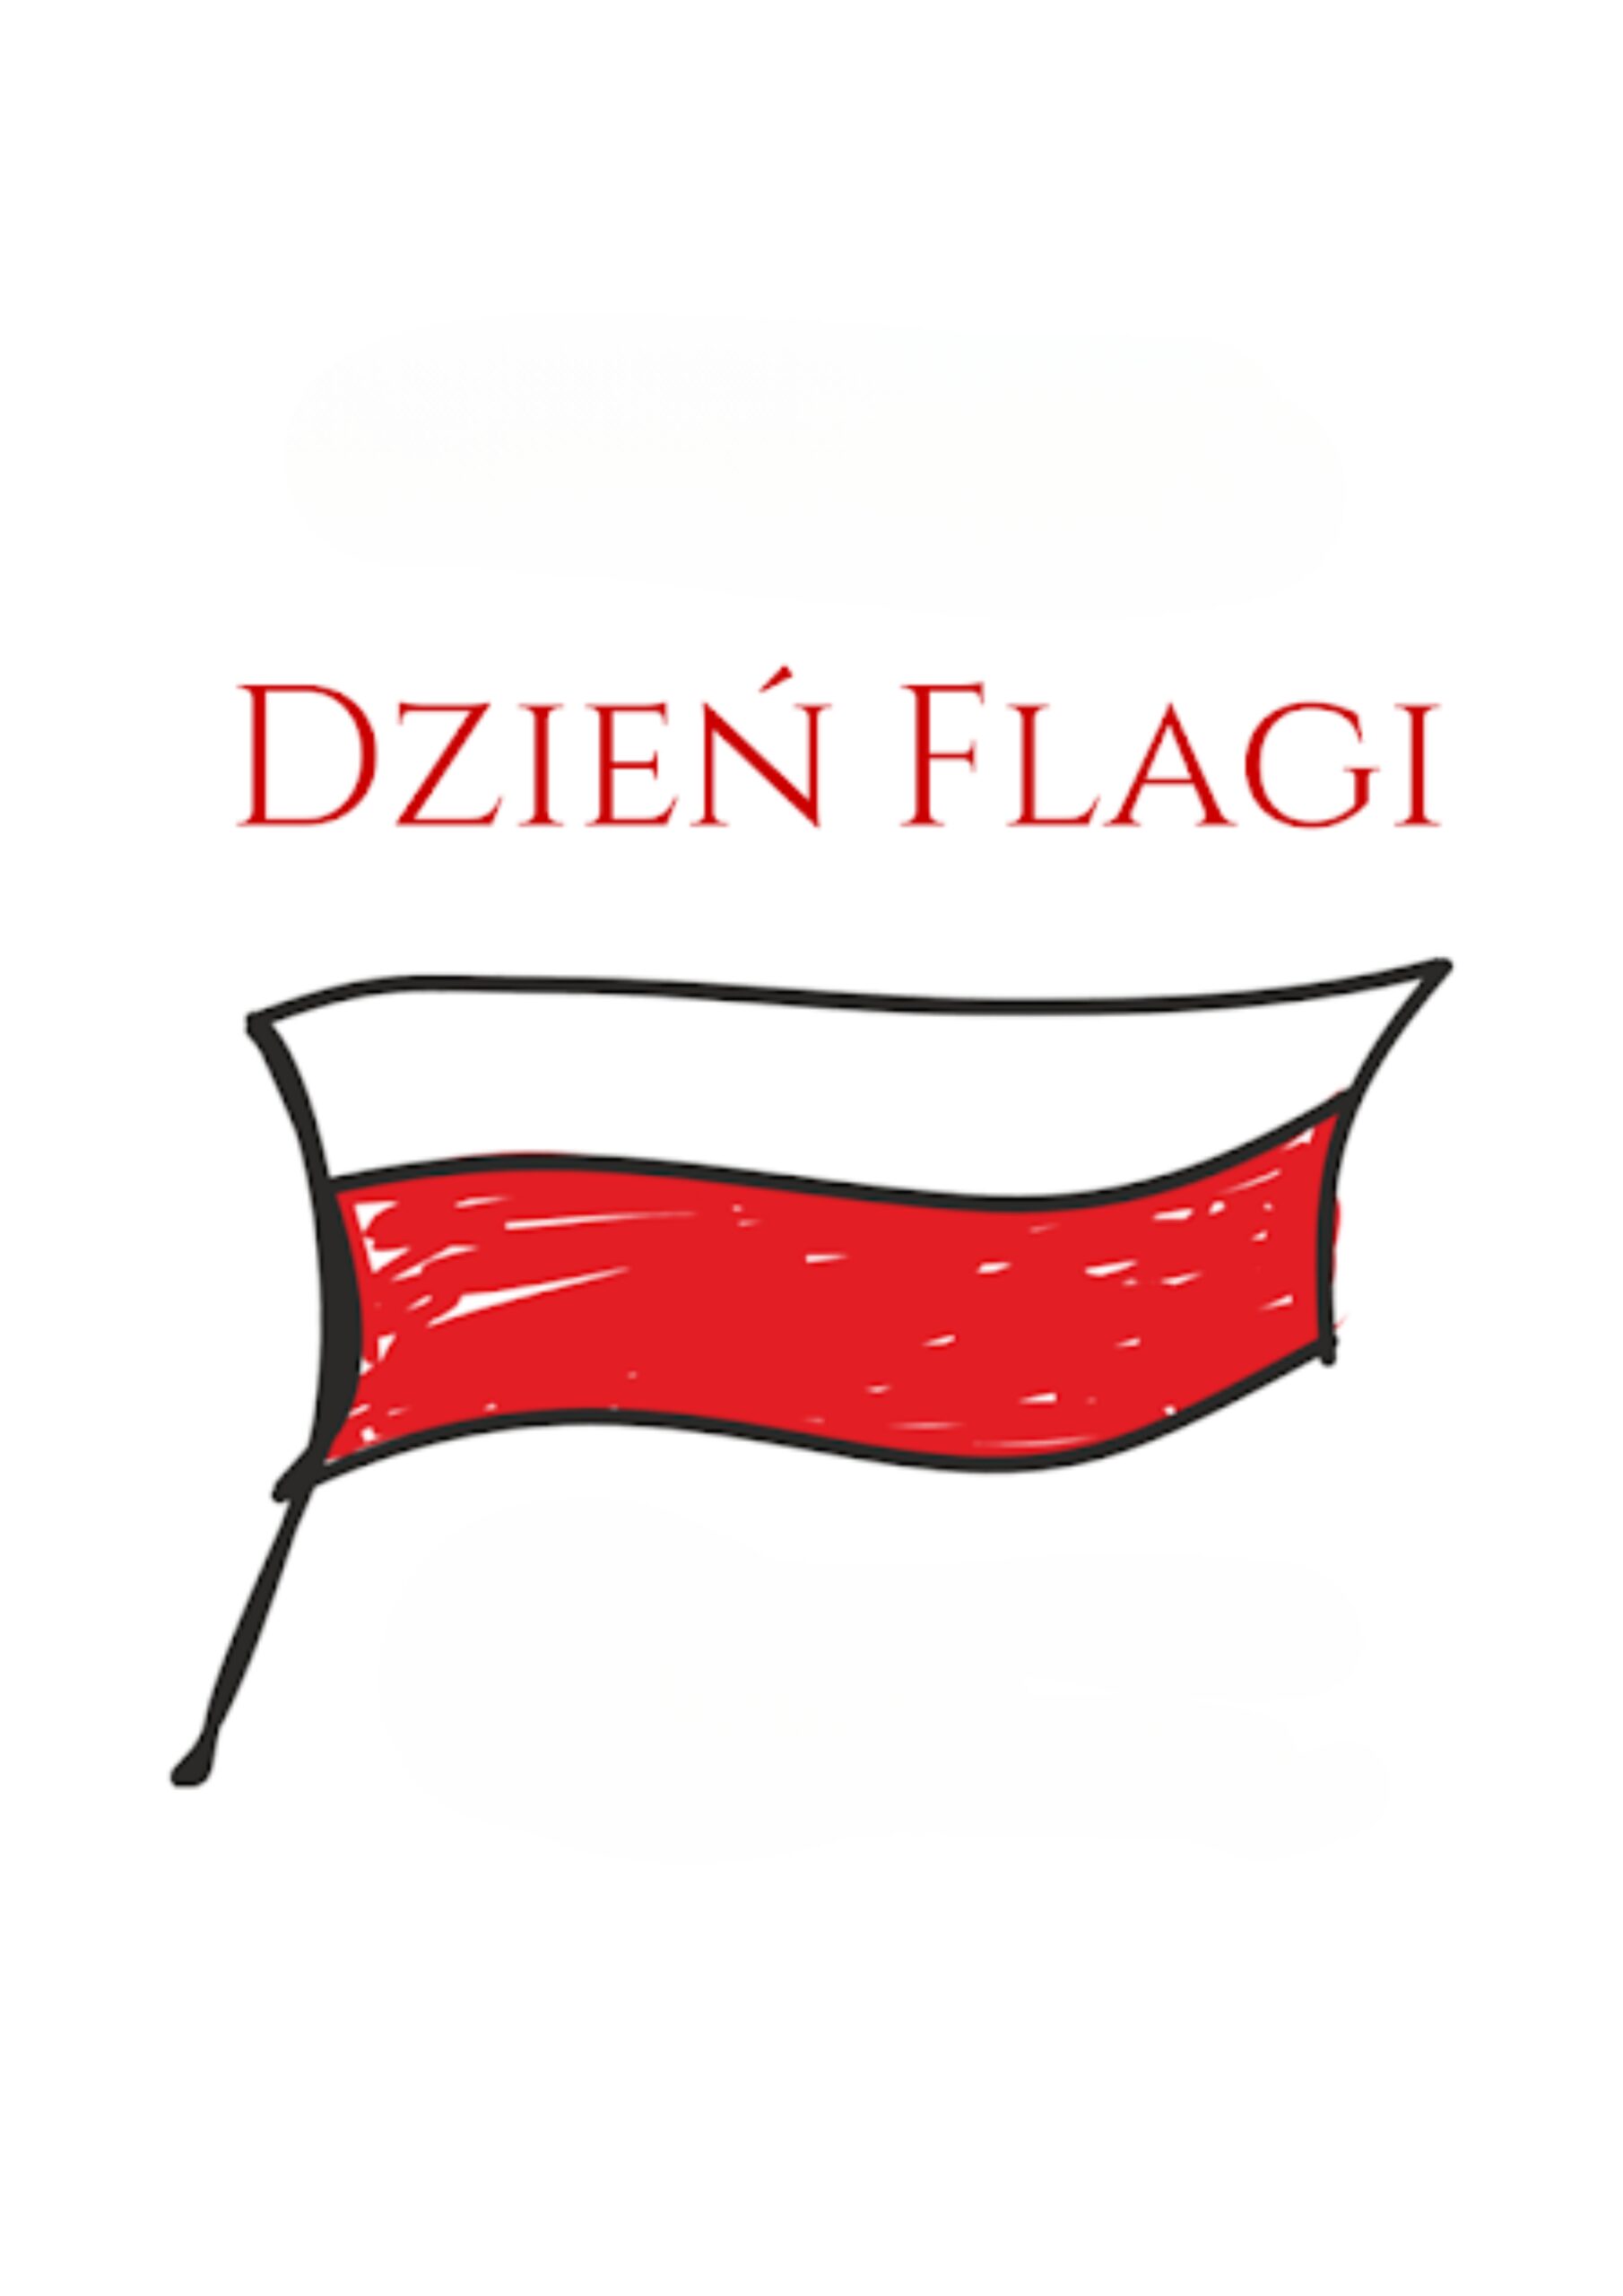 Read more about the article 🇵🇱 Dzień FLAGI 🇵🇱